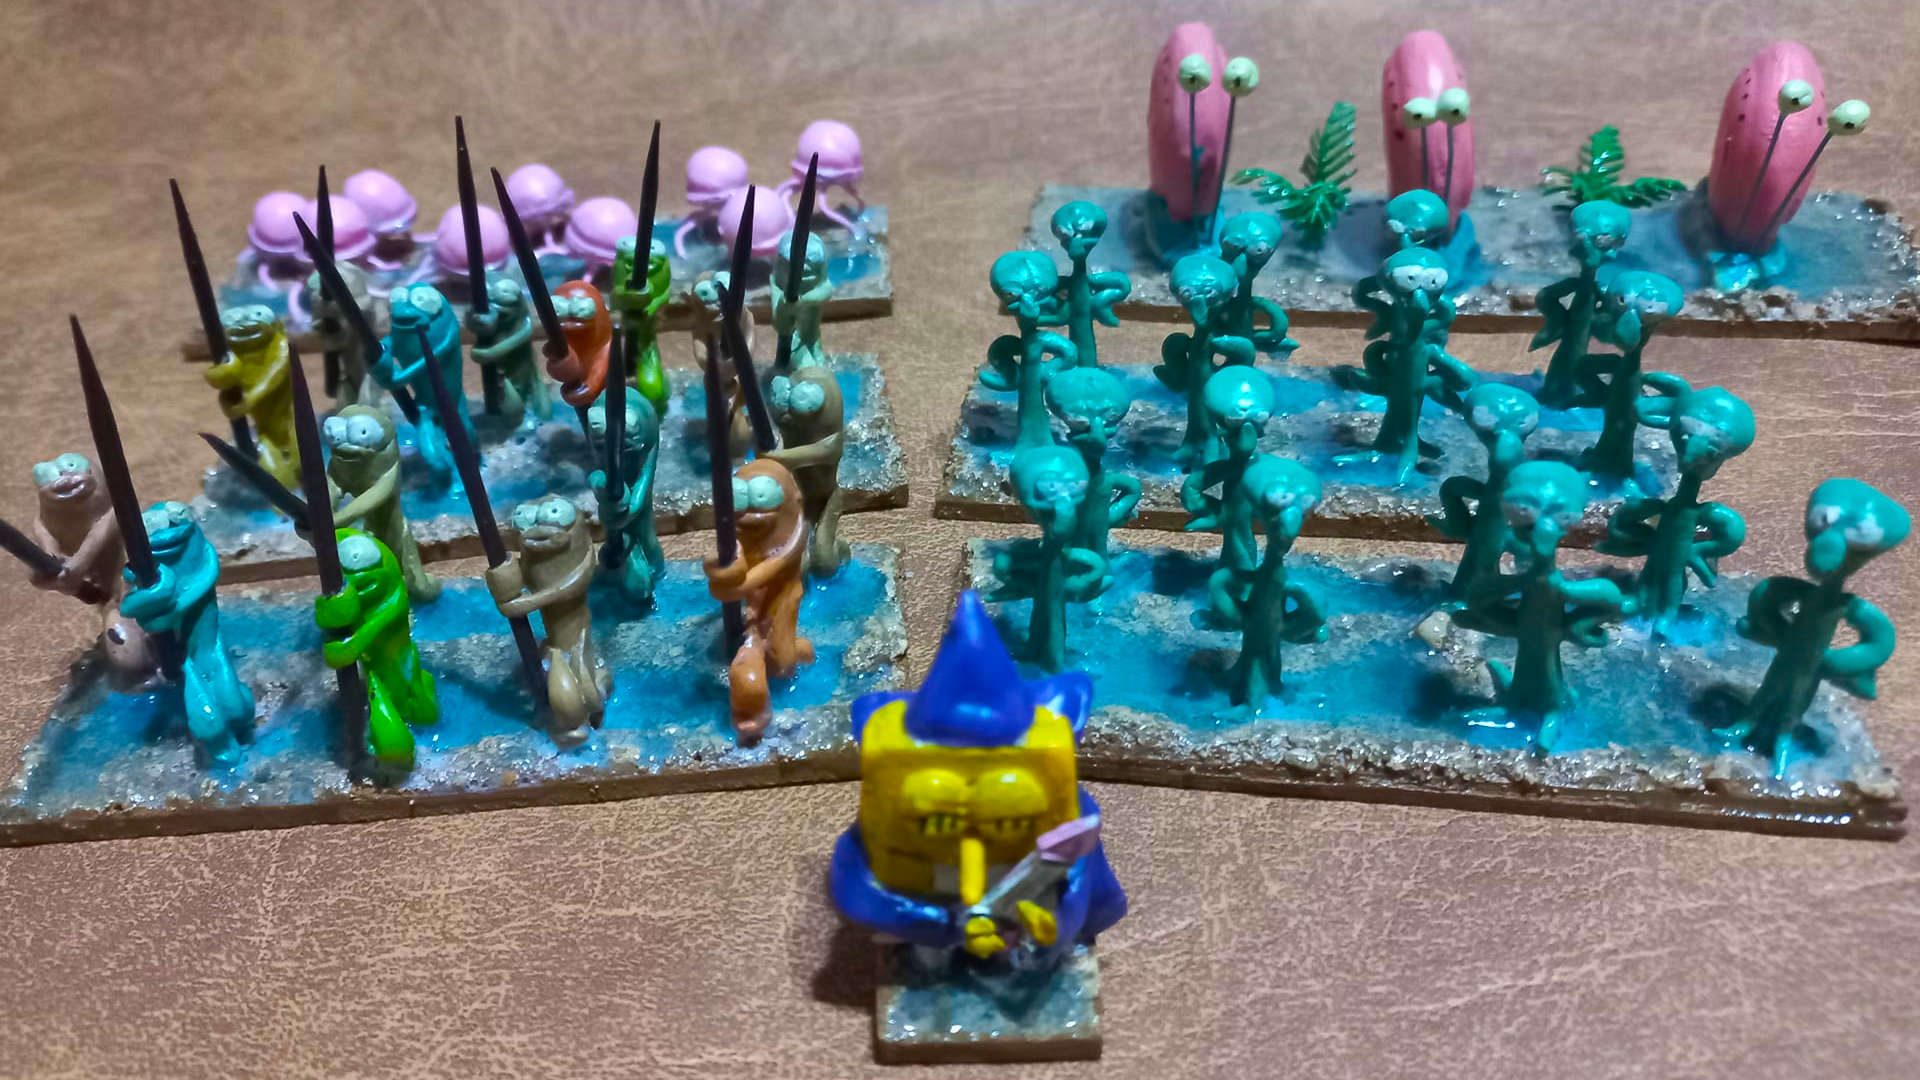 Sponge Bob Warhammer army - SpongeBob in a wizard hat playing a guitar, made from cold porcelain, leading an army of fish with pikes, squidwards, polyps, and Gary the snail